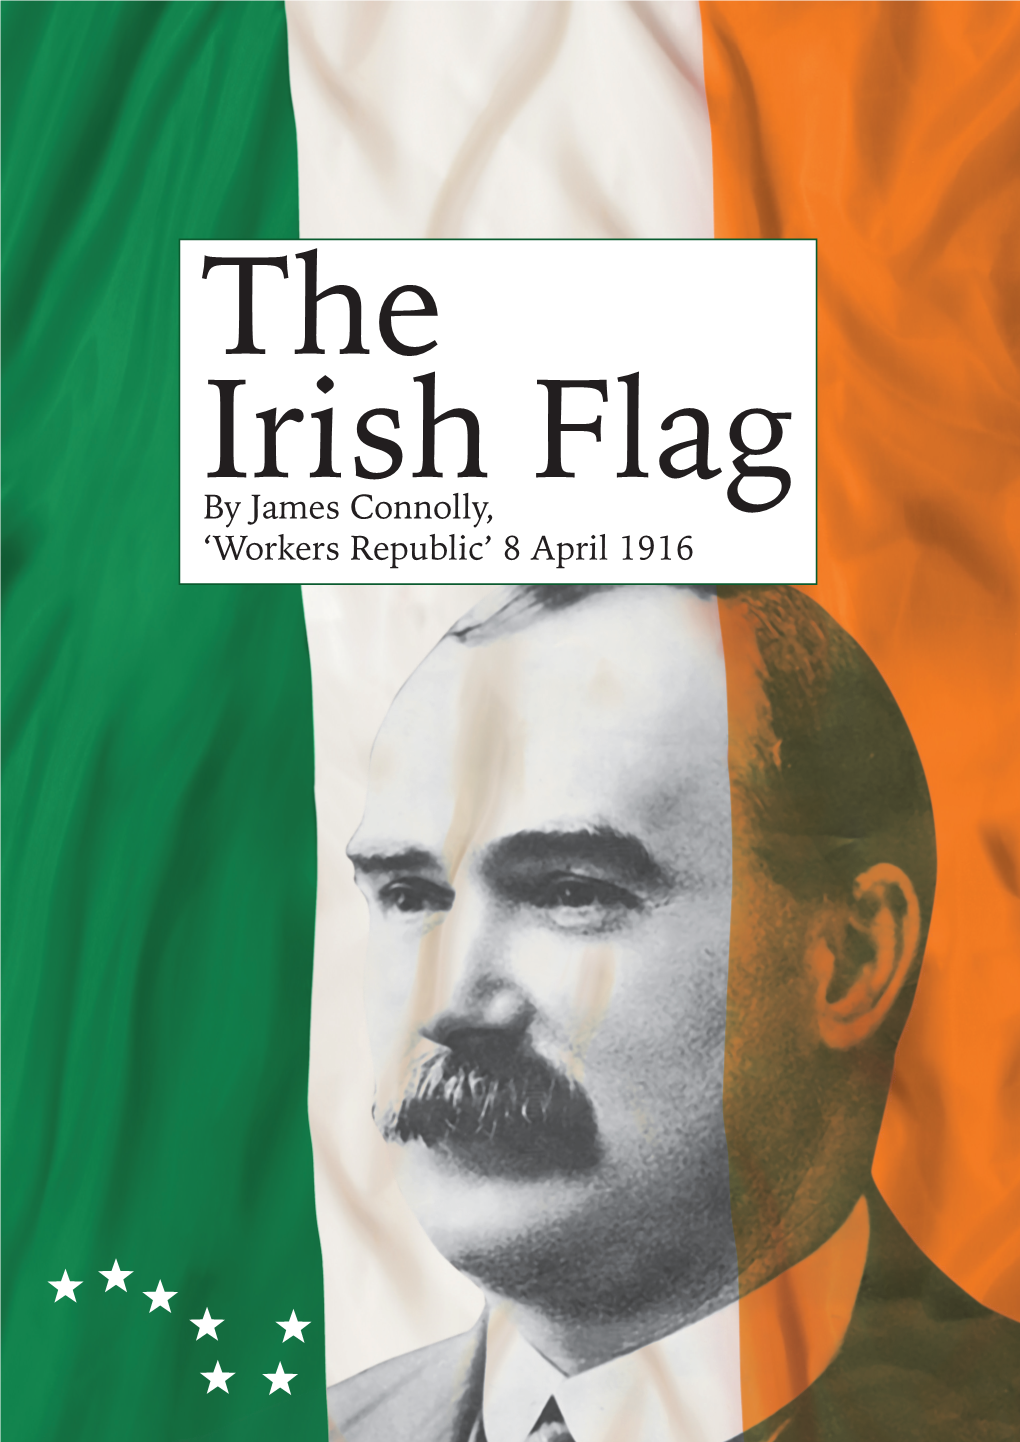 By James Connolly, Flag ‘Workers Republic’ 8 April 1916 the Irish Flag